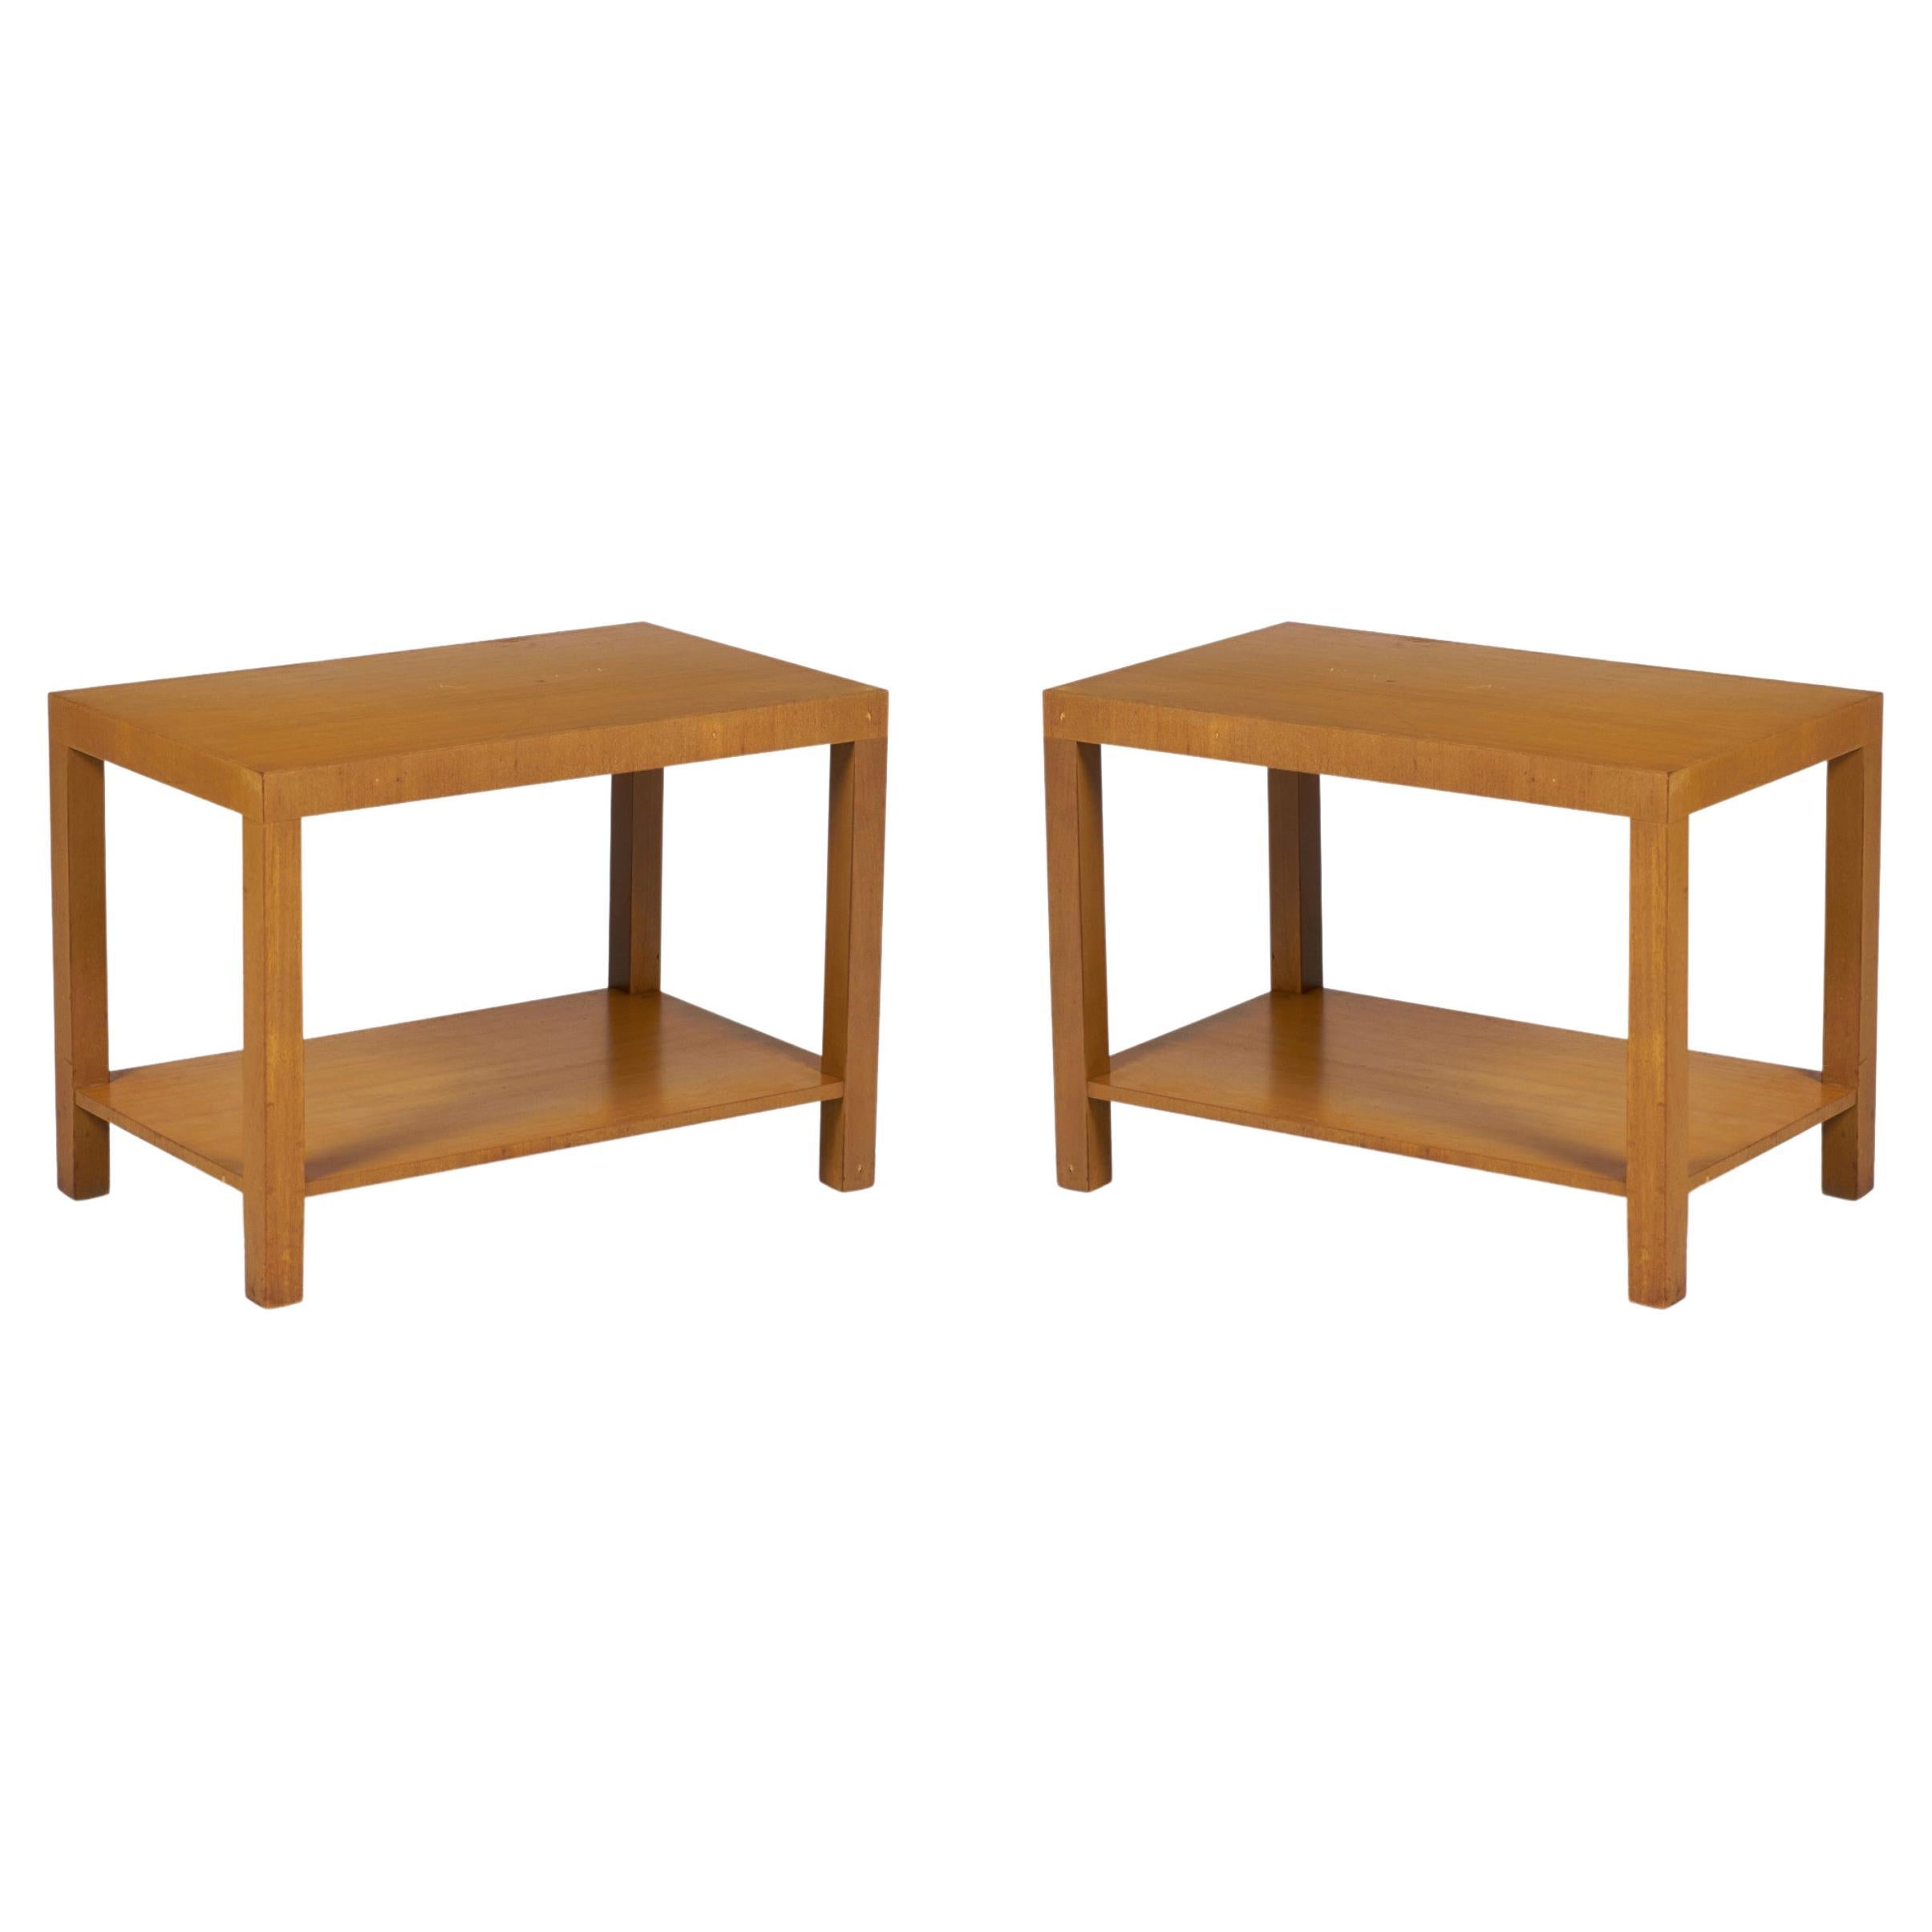 Pair of Widdicomb Modern American Mid-Century Parsons Style Wooden End Tables For Sale